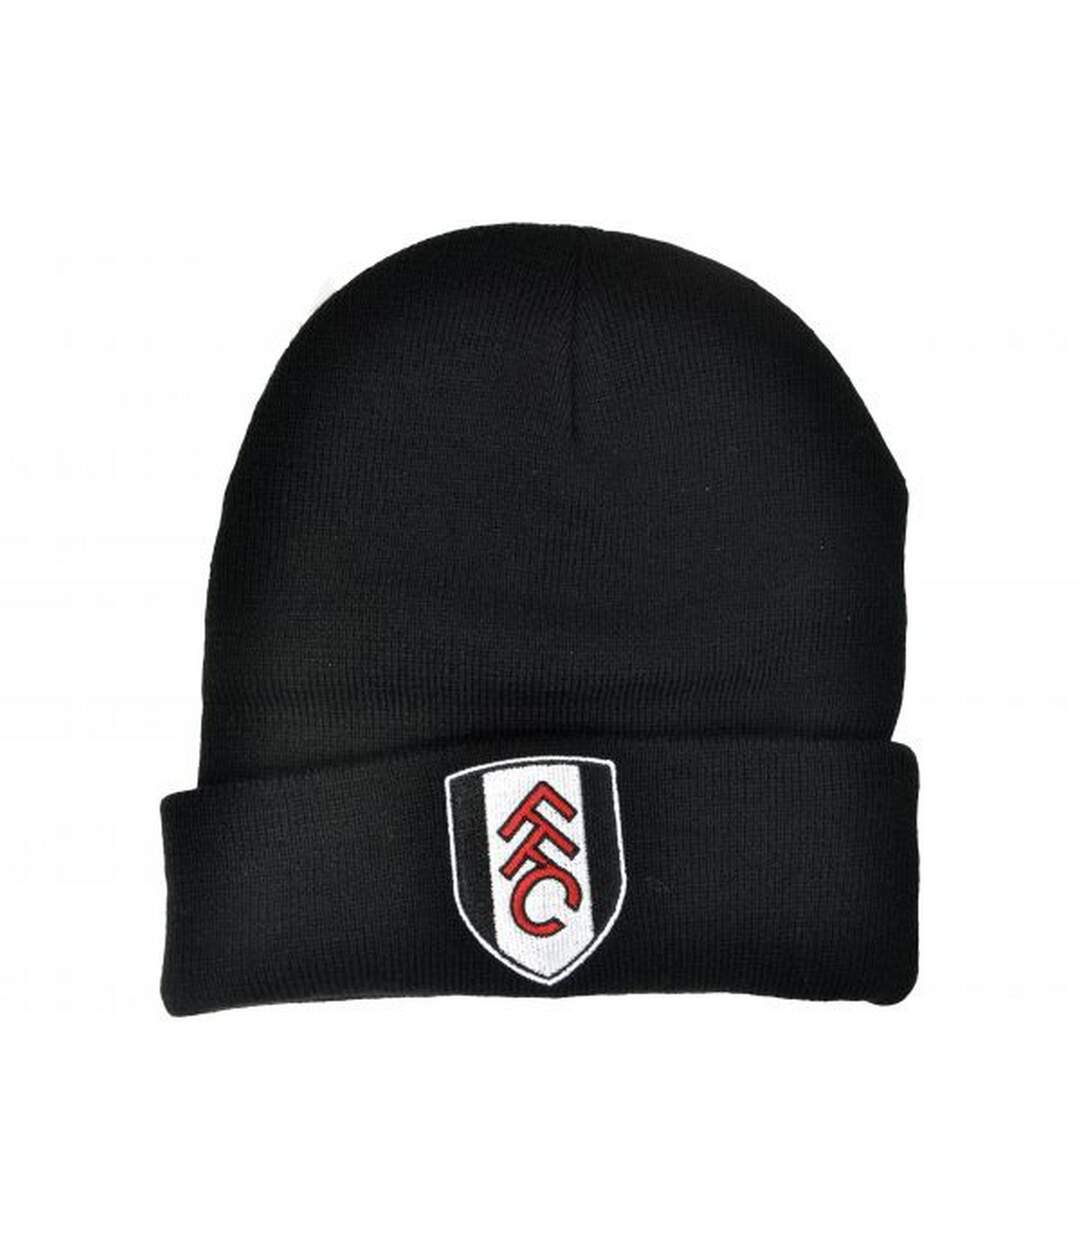 Fulham FC Crest Knitted Turn Up Beanie (Black)